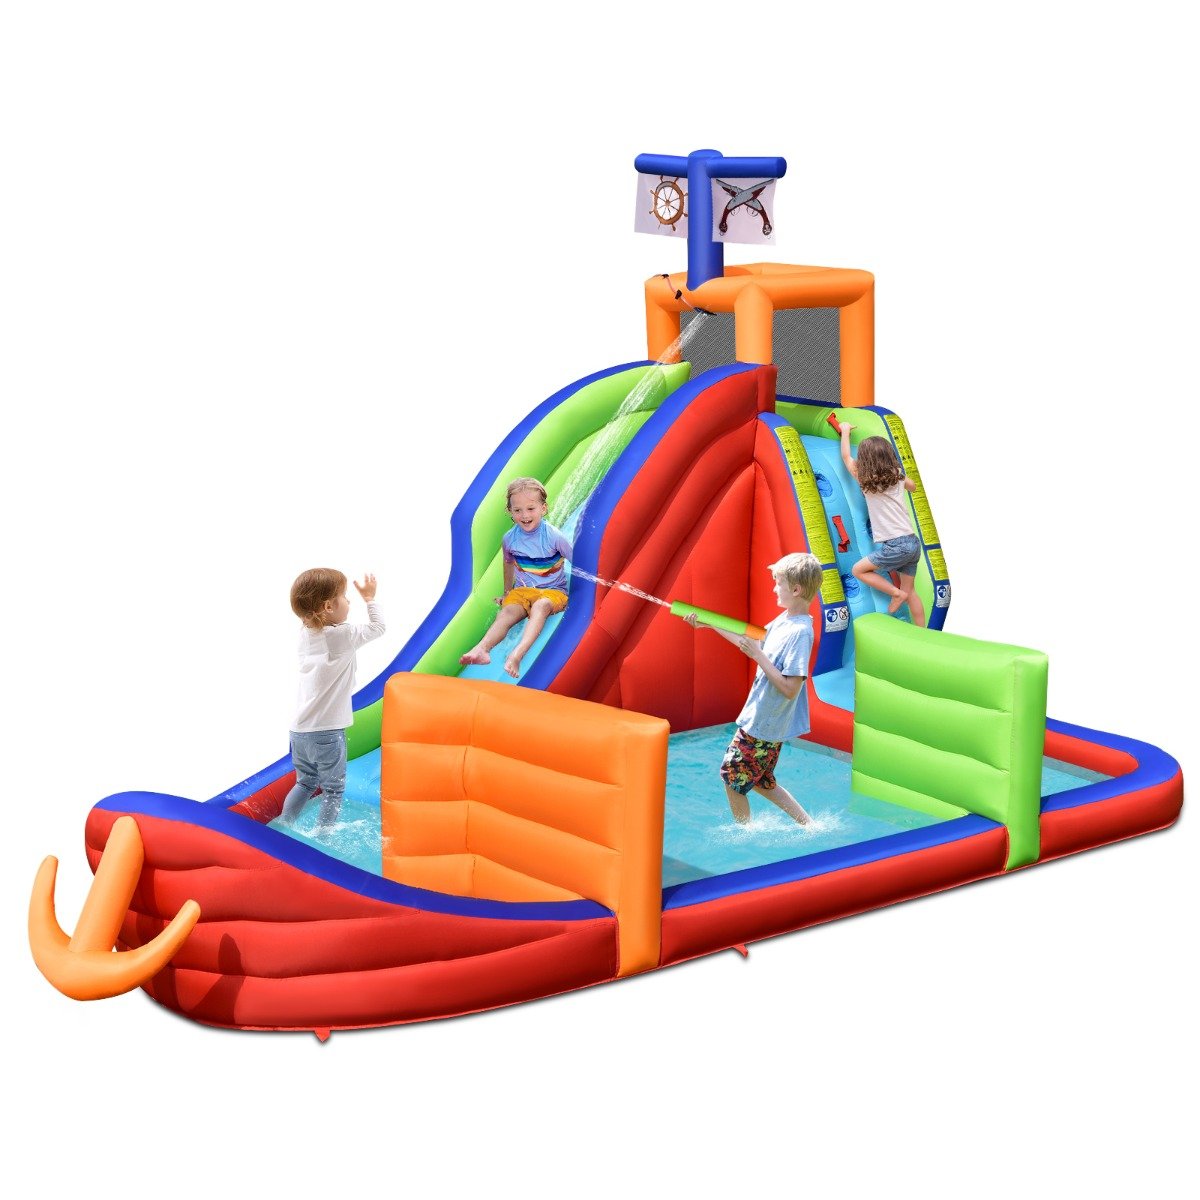 Playful Pirate Expeditions: Multifunctional 6-in-1 Inflatable Bounce House